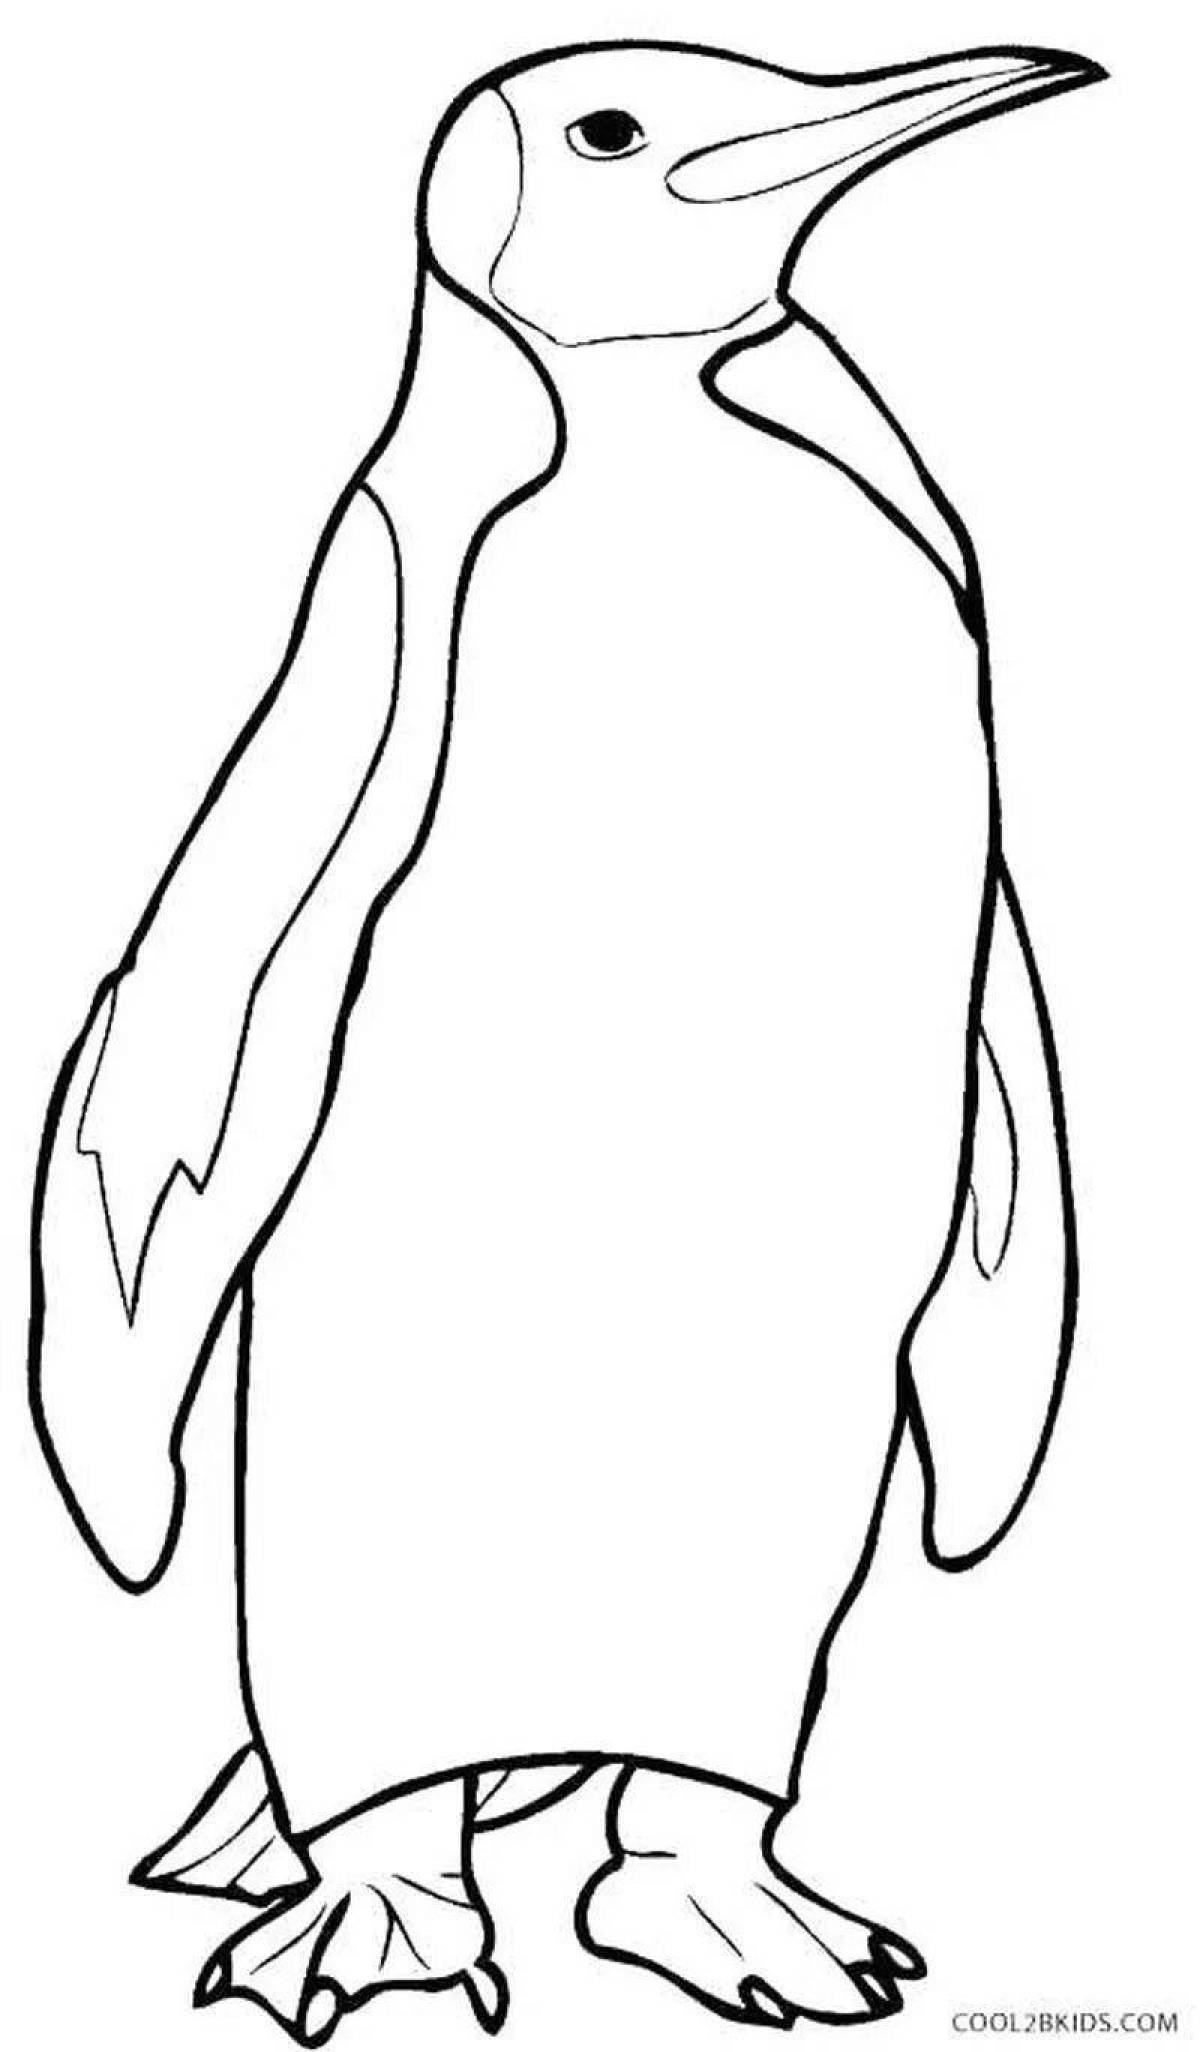 Coloring page magical emperor penguin